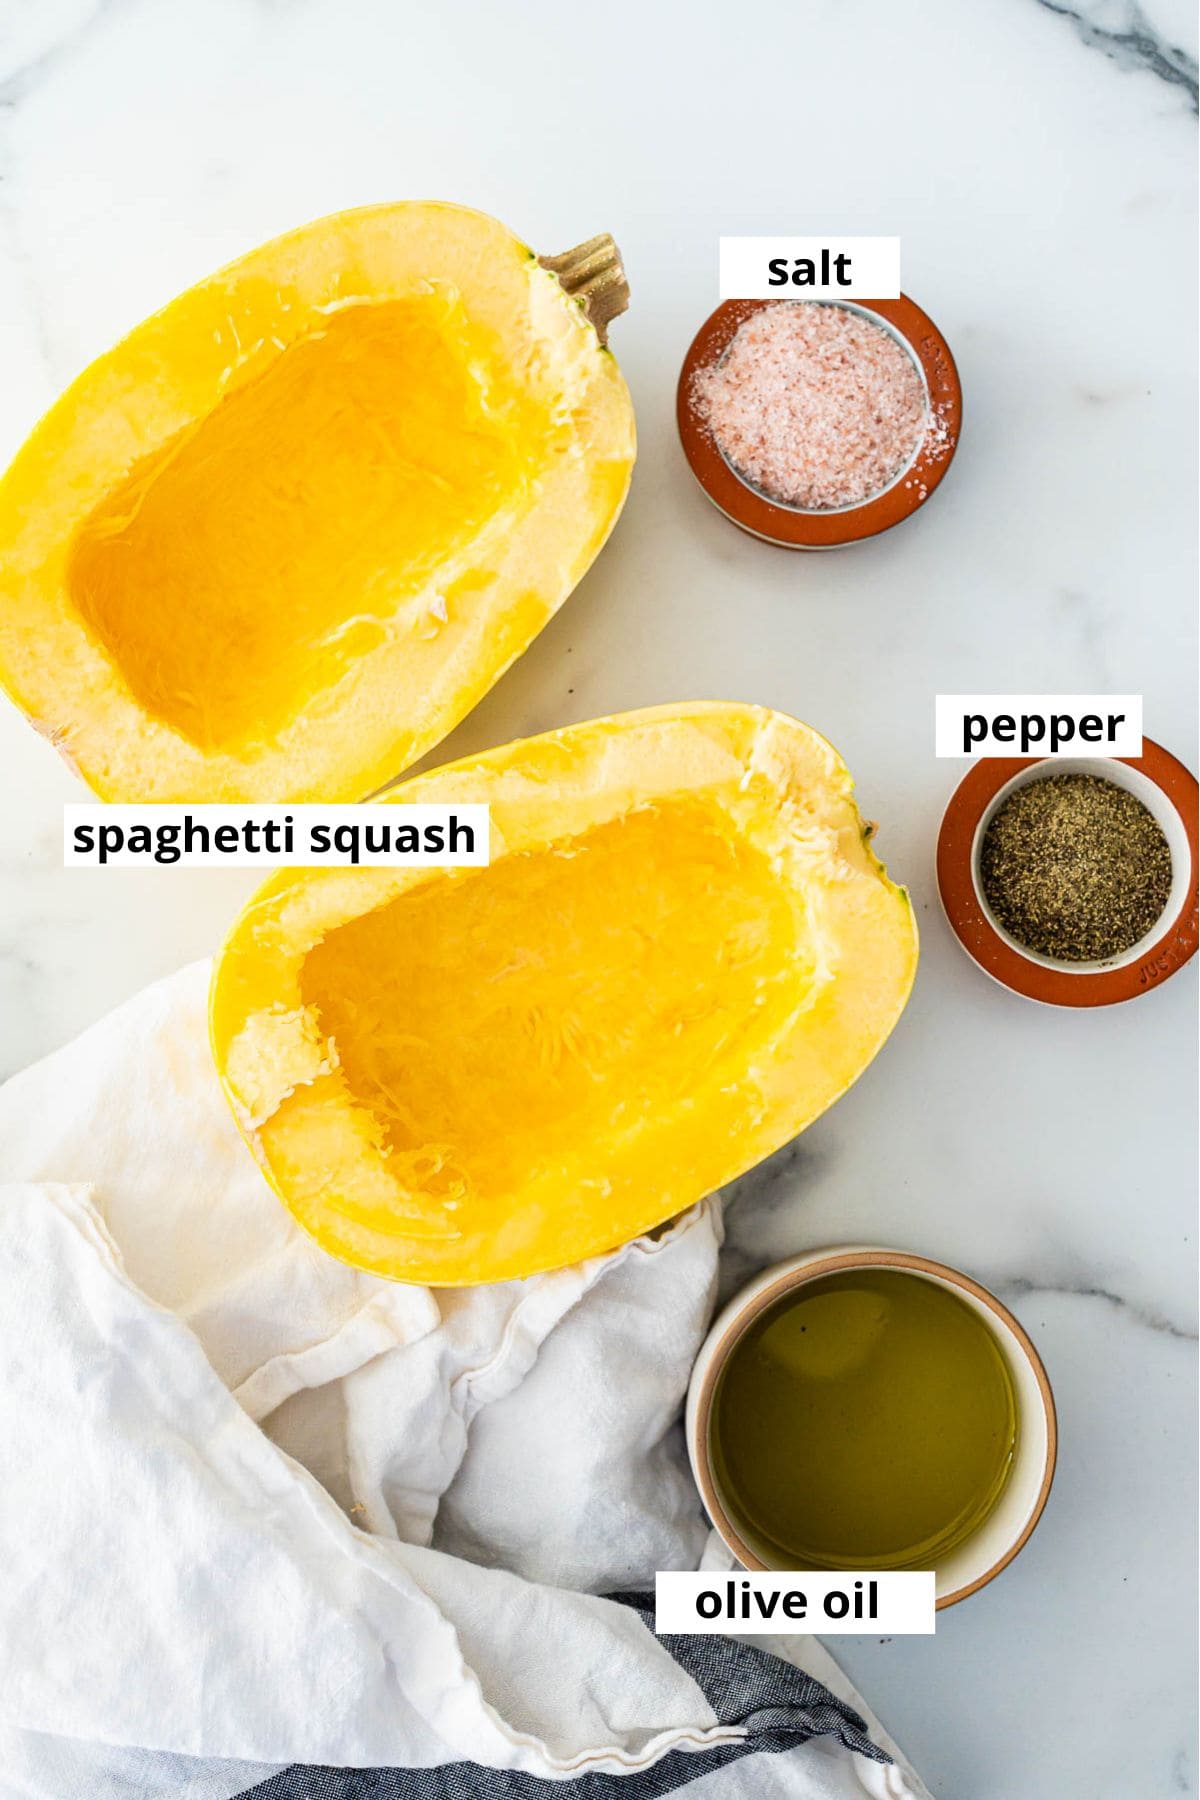 Cut in half spaghetti squash, salt, pepper, olive oil and towel on a counter.